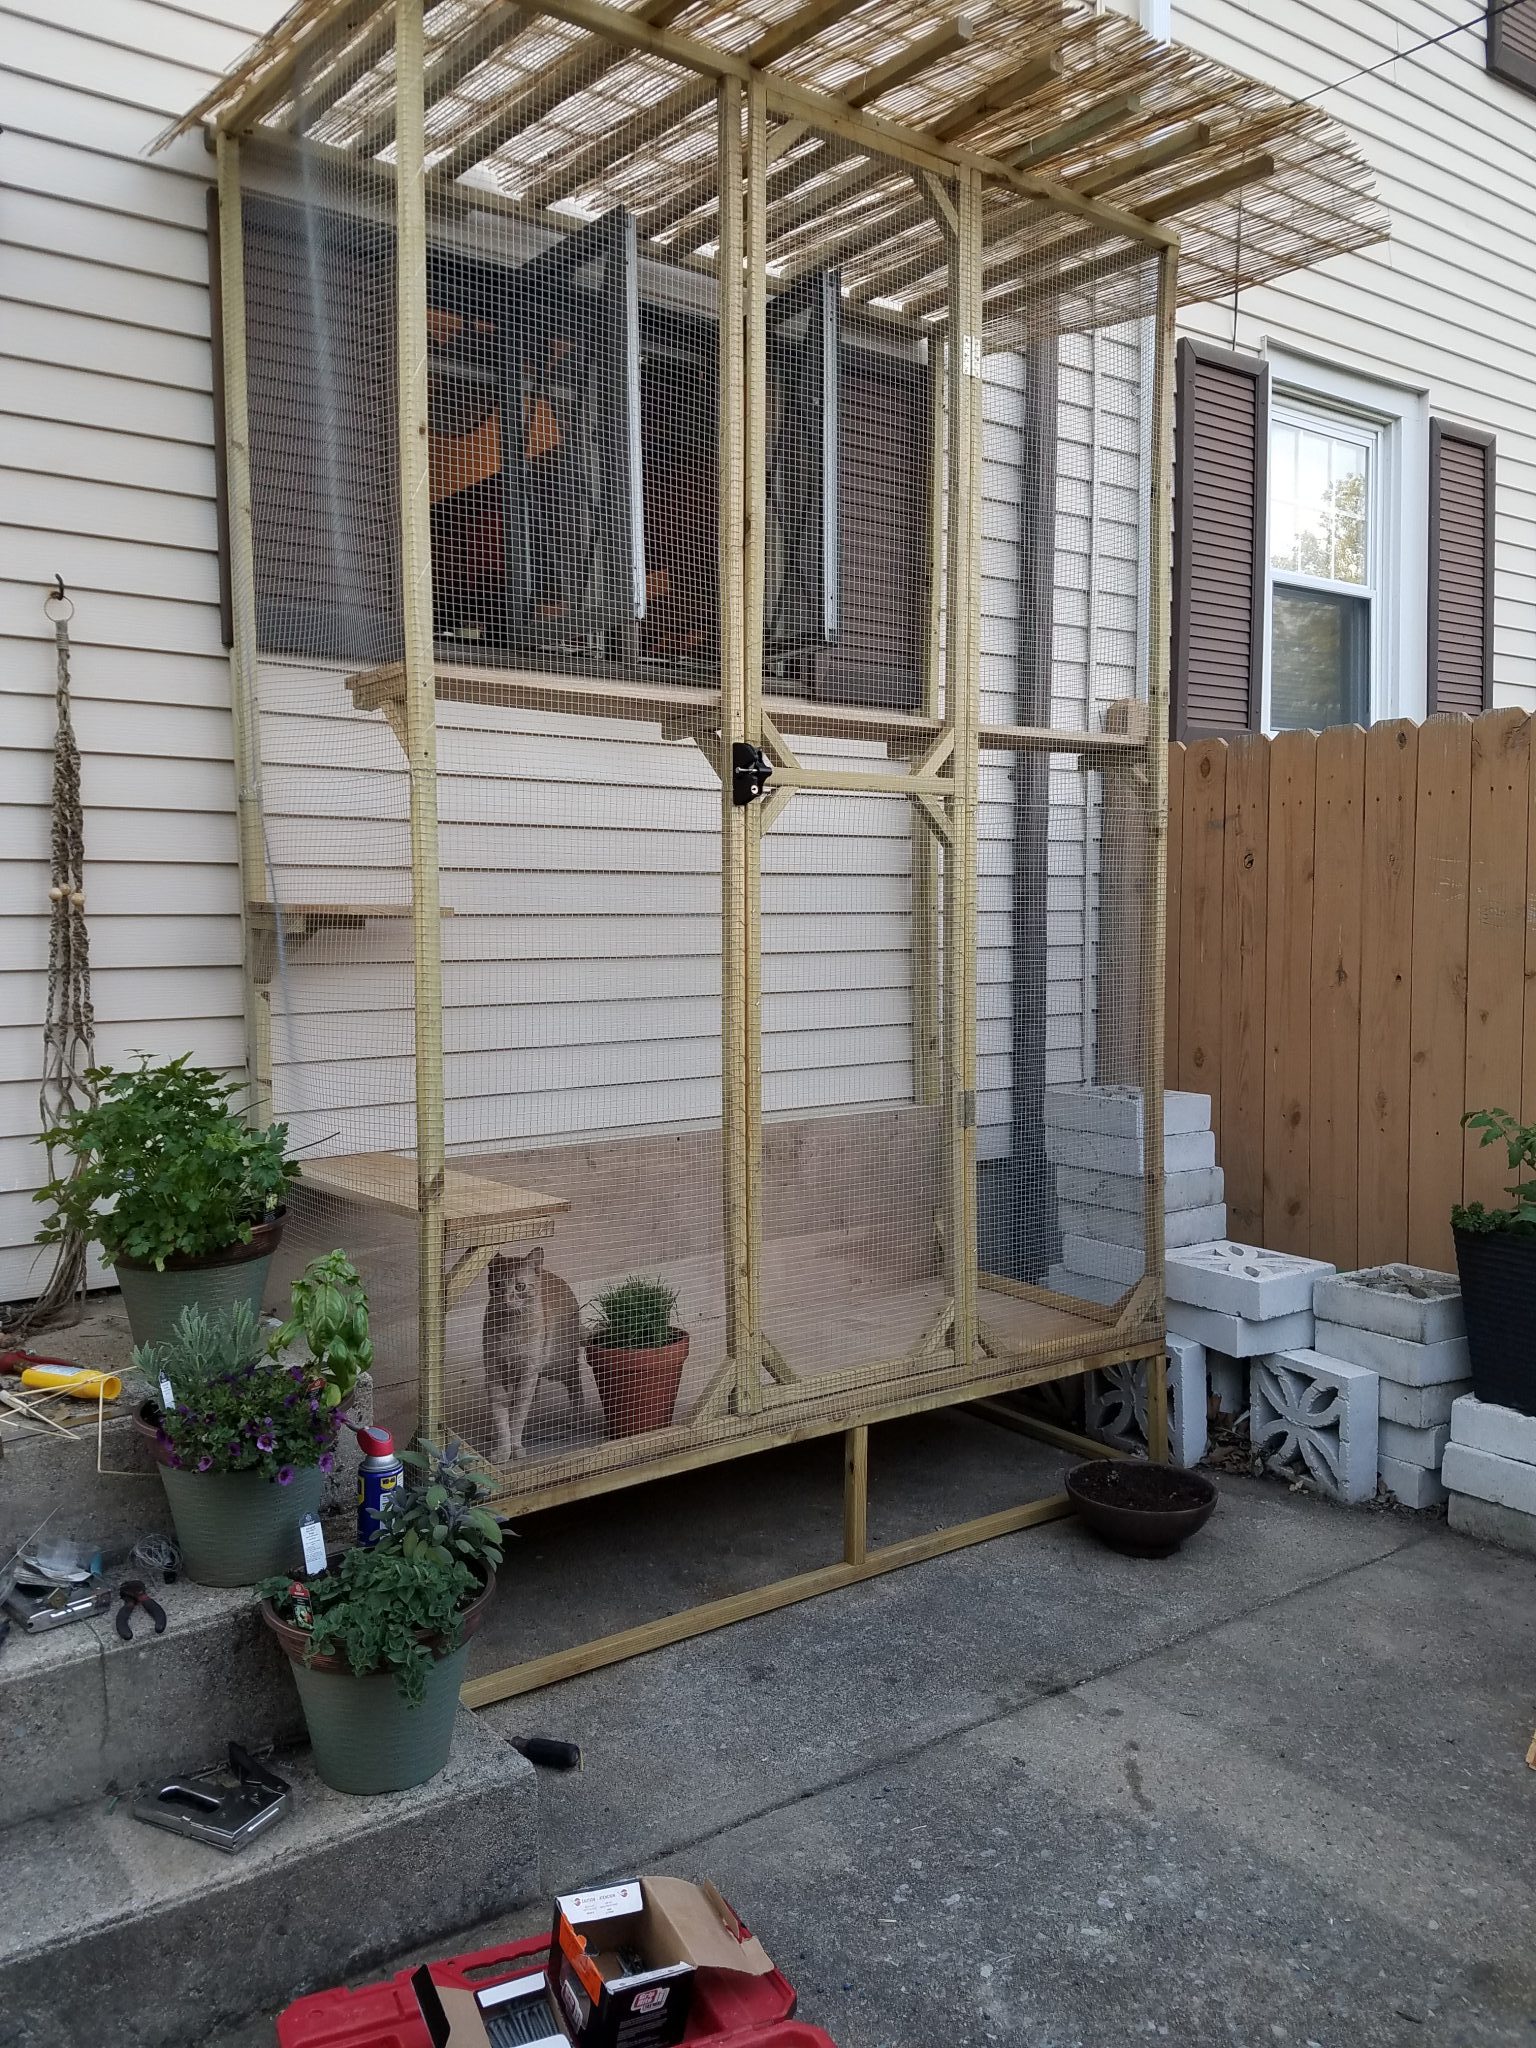 Catio Hacks Every Cat Owner Should Know